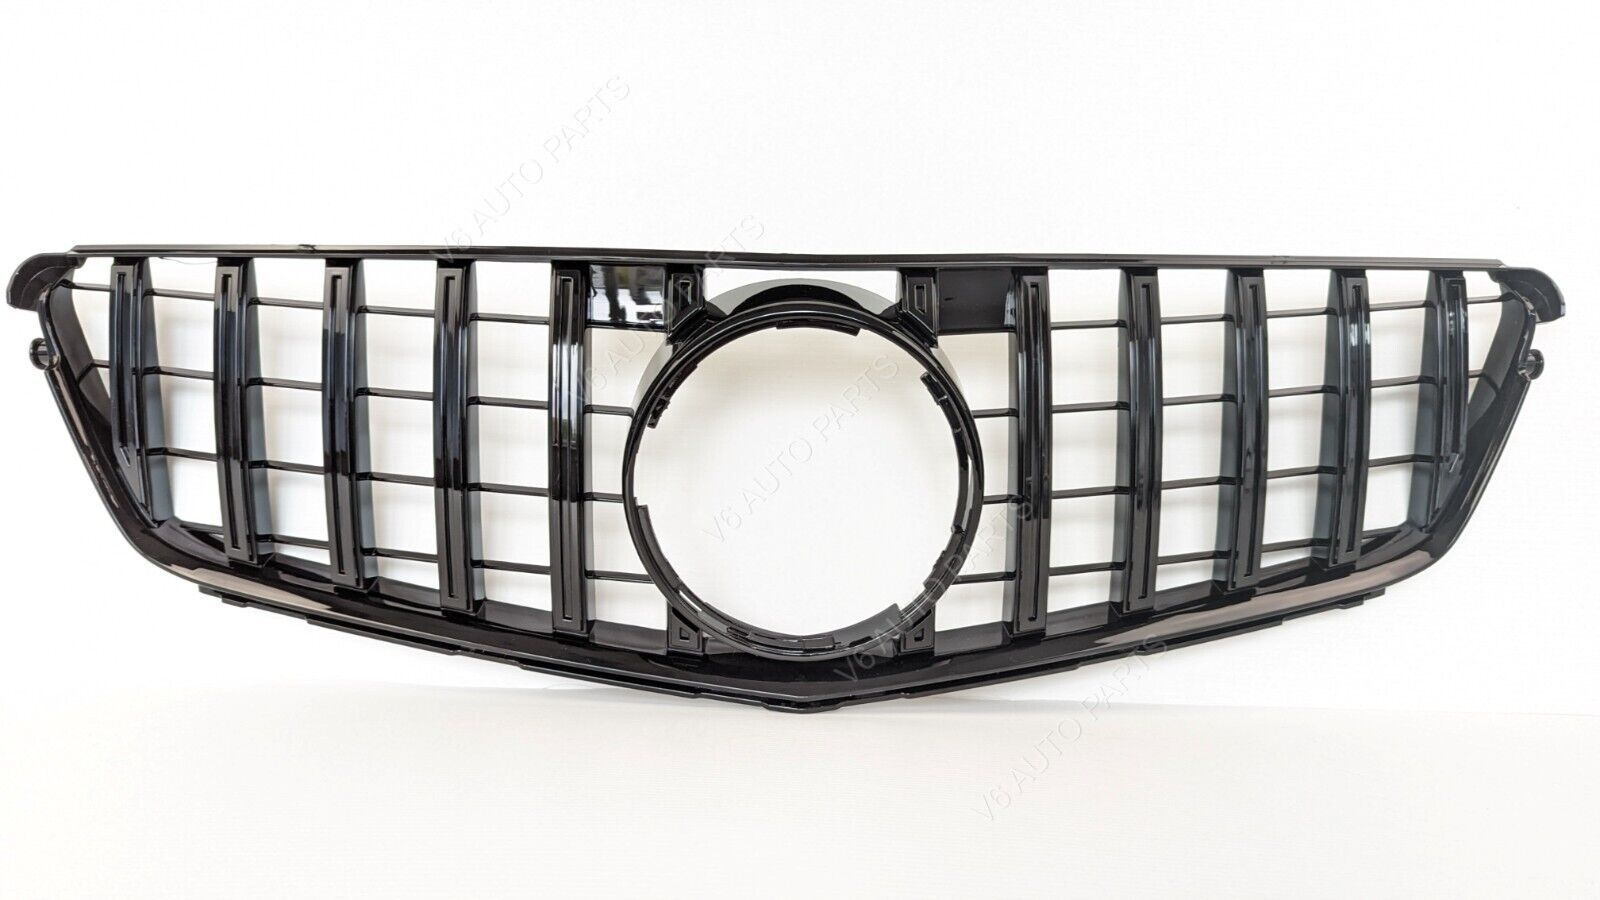 Mercedes Benz C-Class Grill W204 Front Radiator GT Grille C200 220 Saloon 07-14